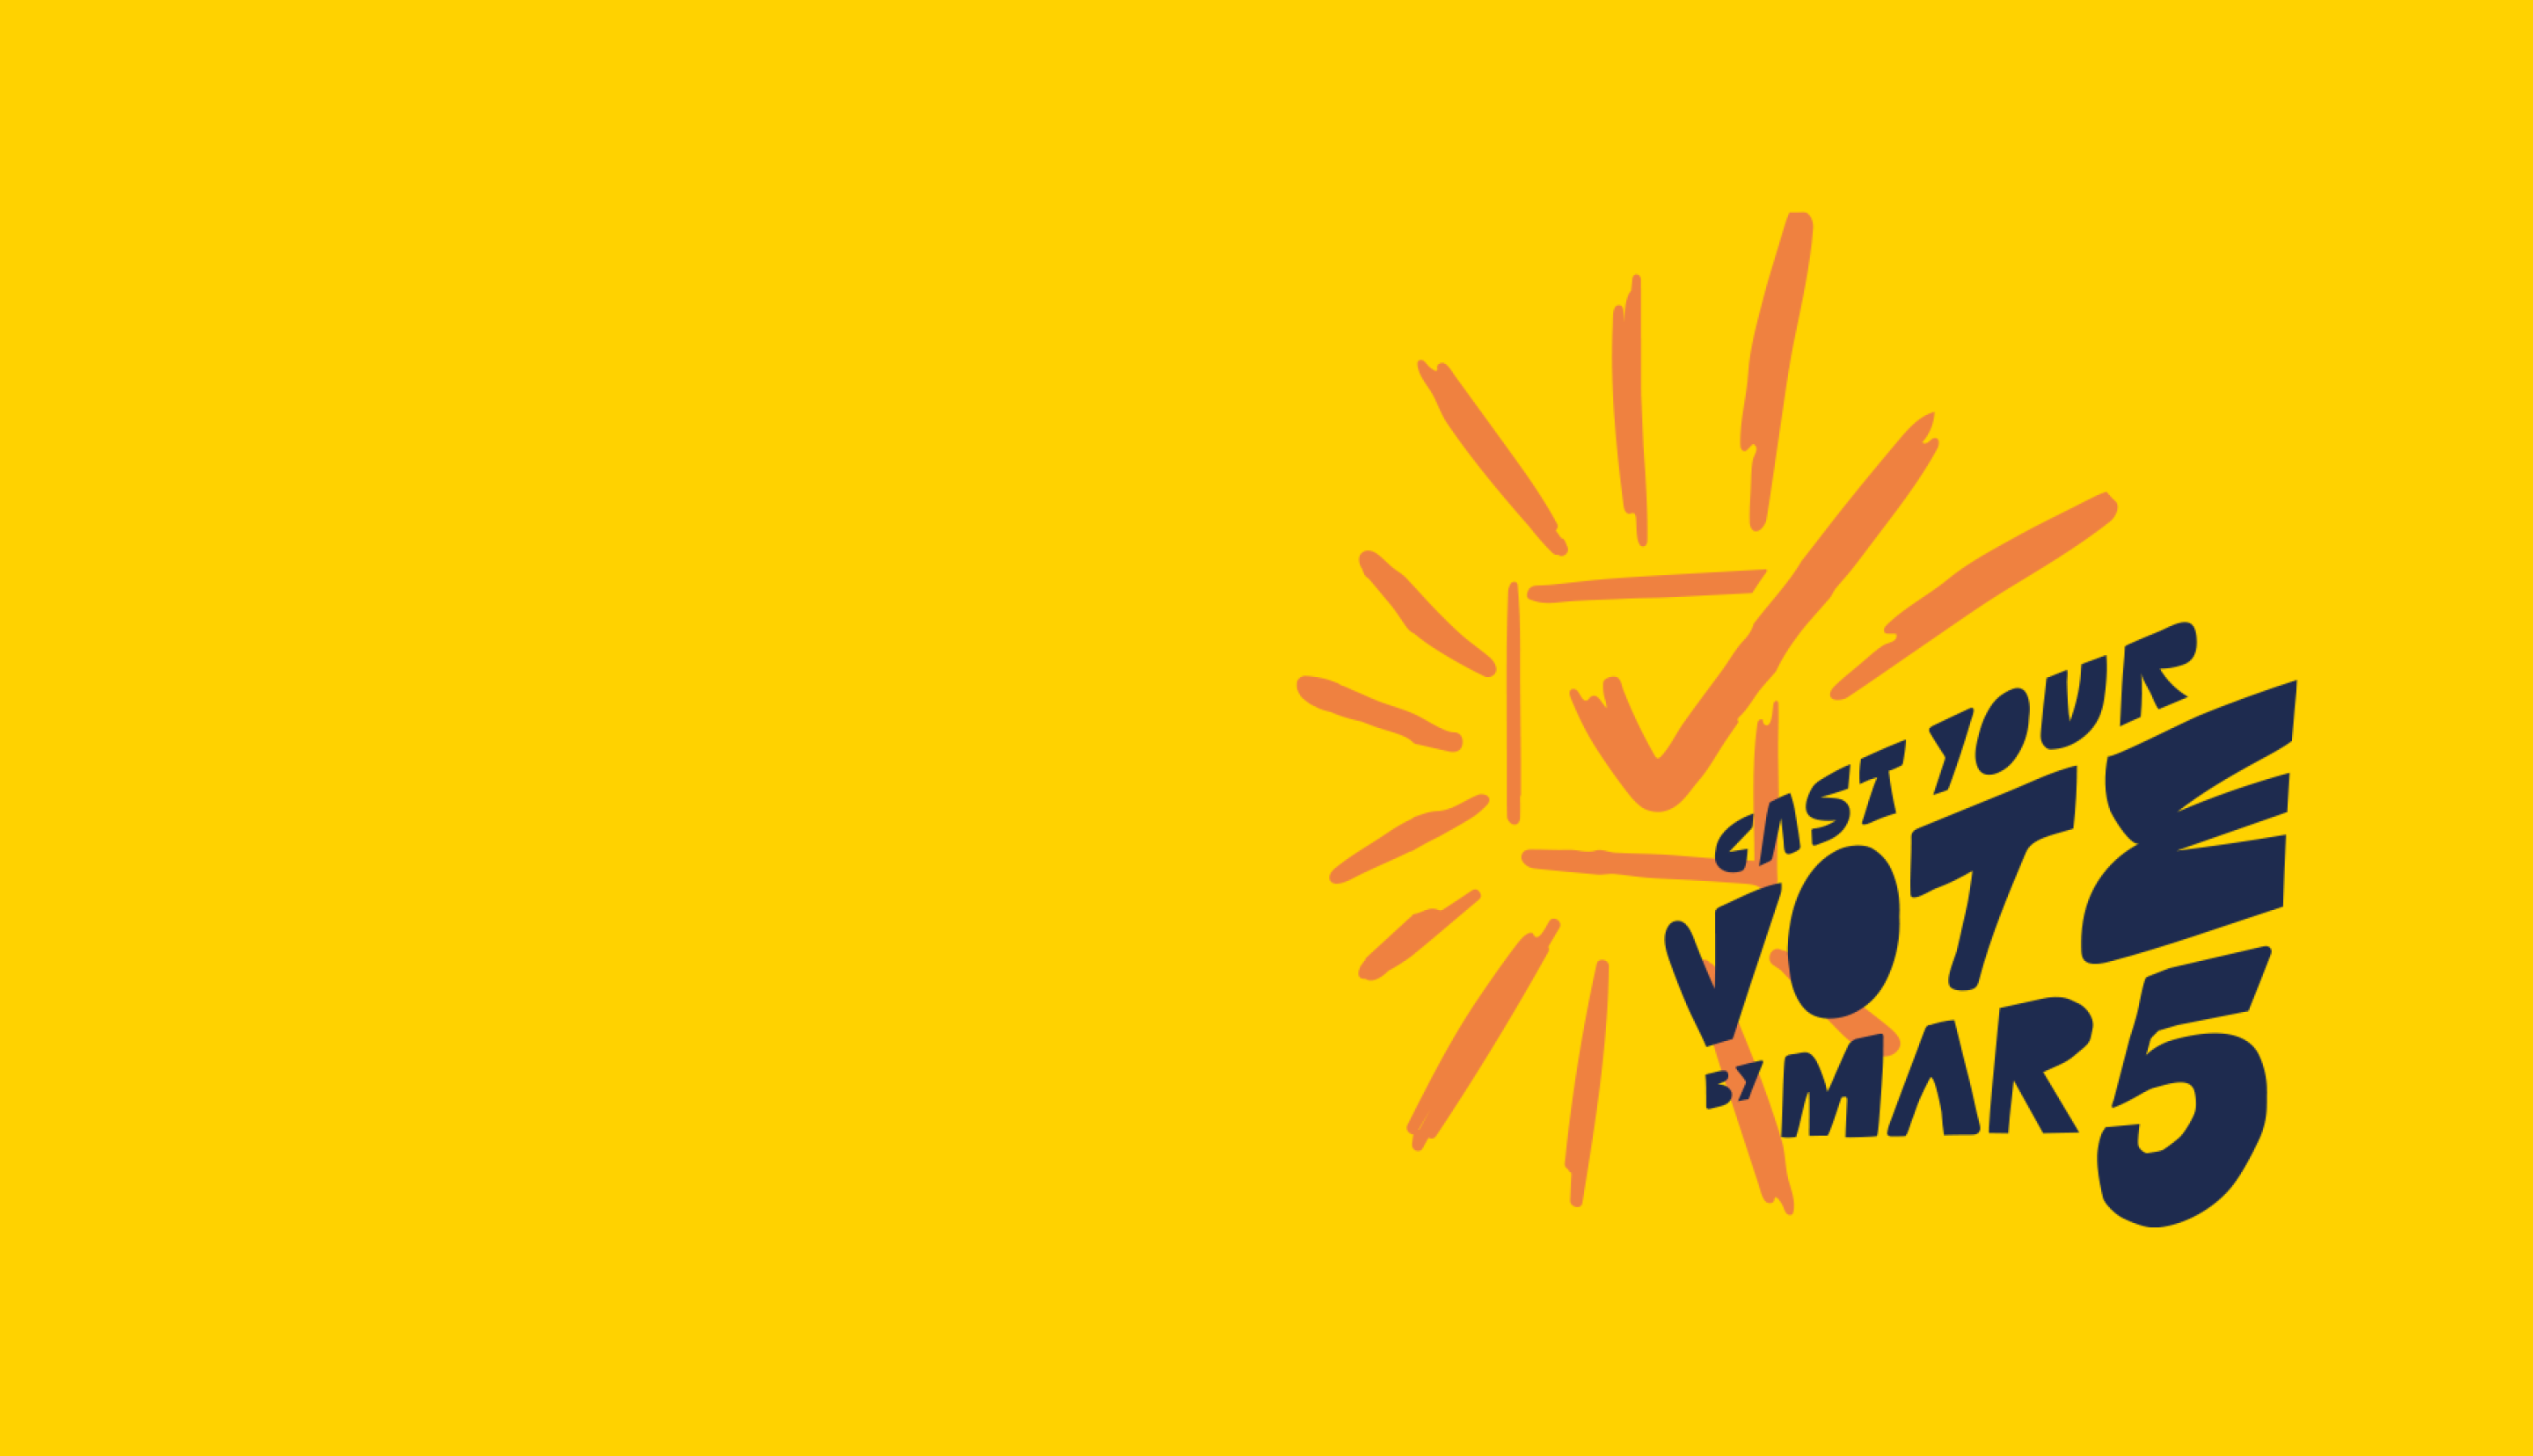 A yellow banner, with an orange-yellow checkbox to the right, with a checkmark in it, and orange-yellow rays exuding from it, with the text Cast Your Vote by March 5 written over it